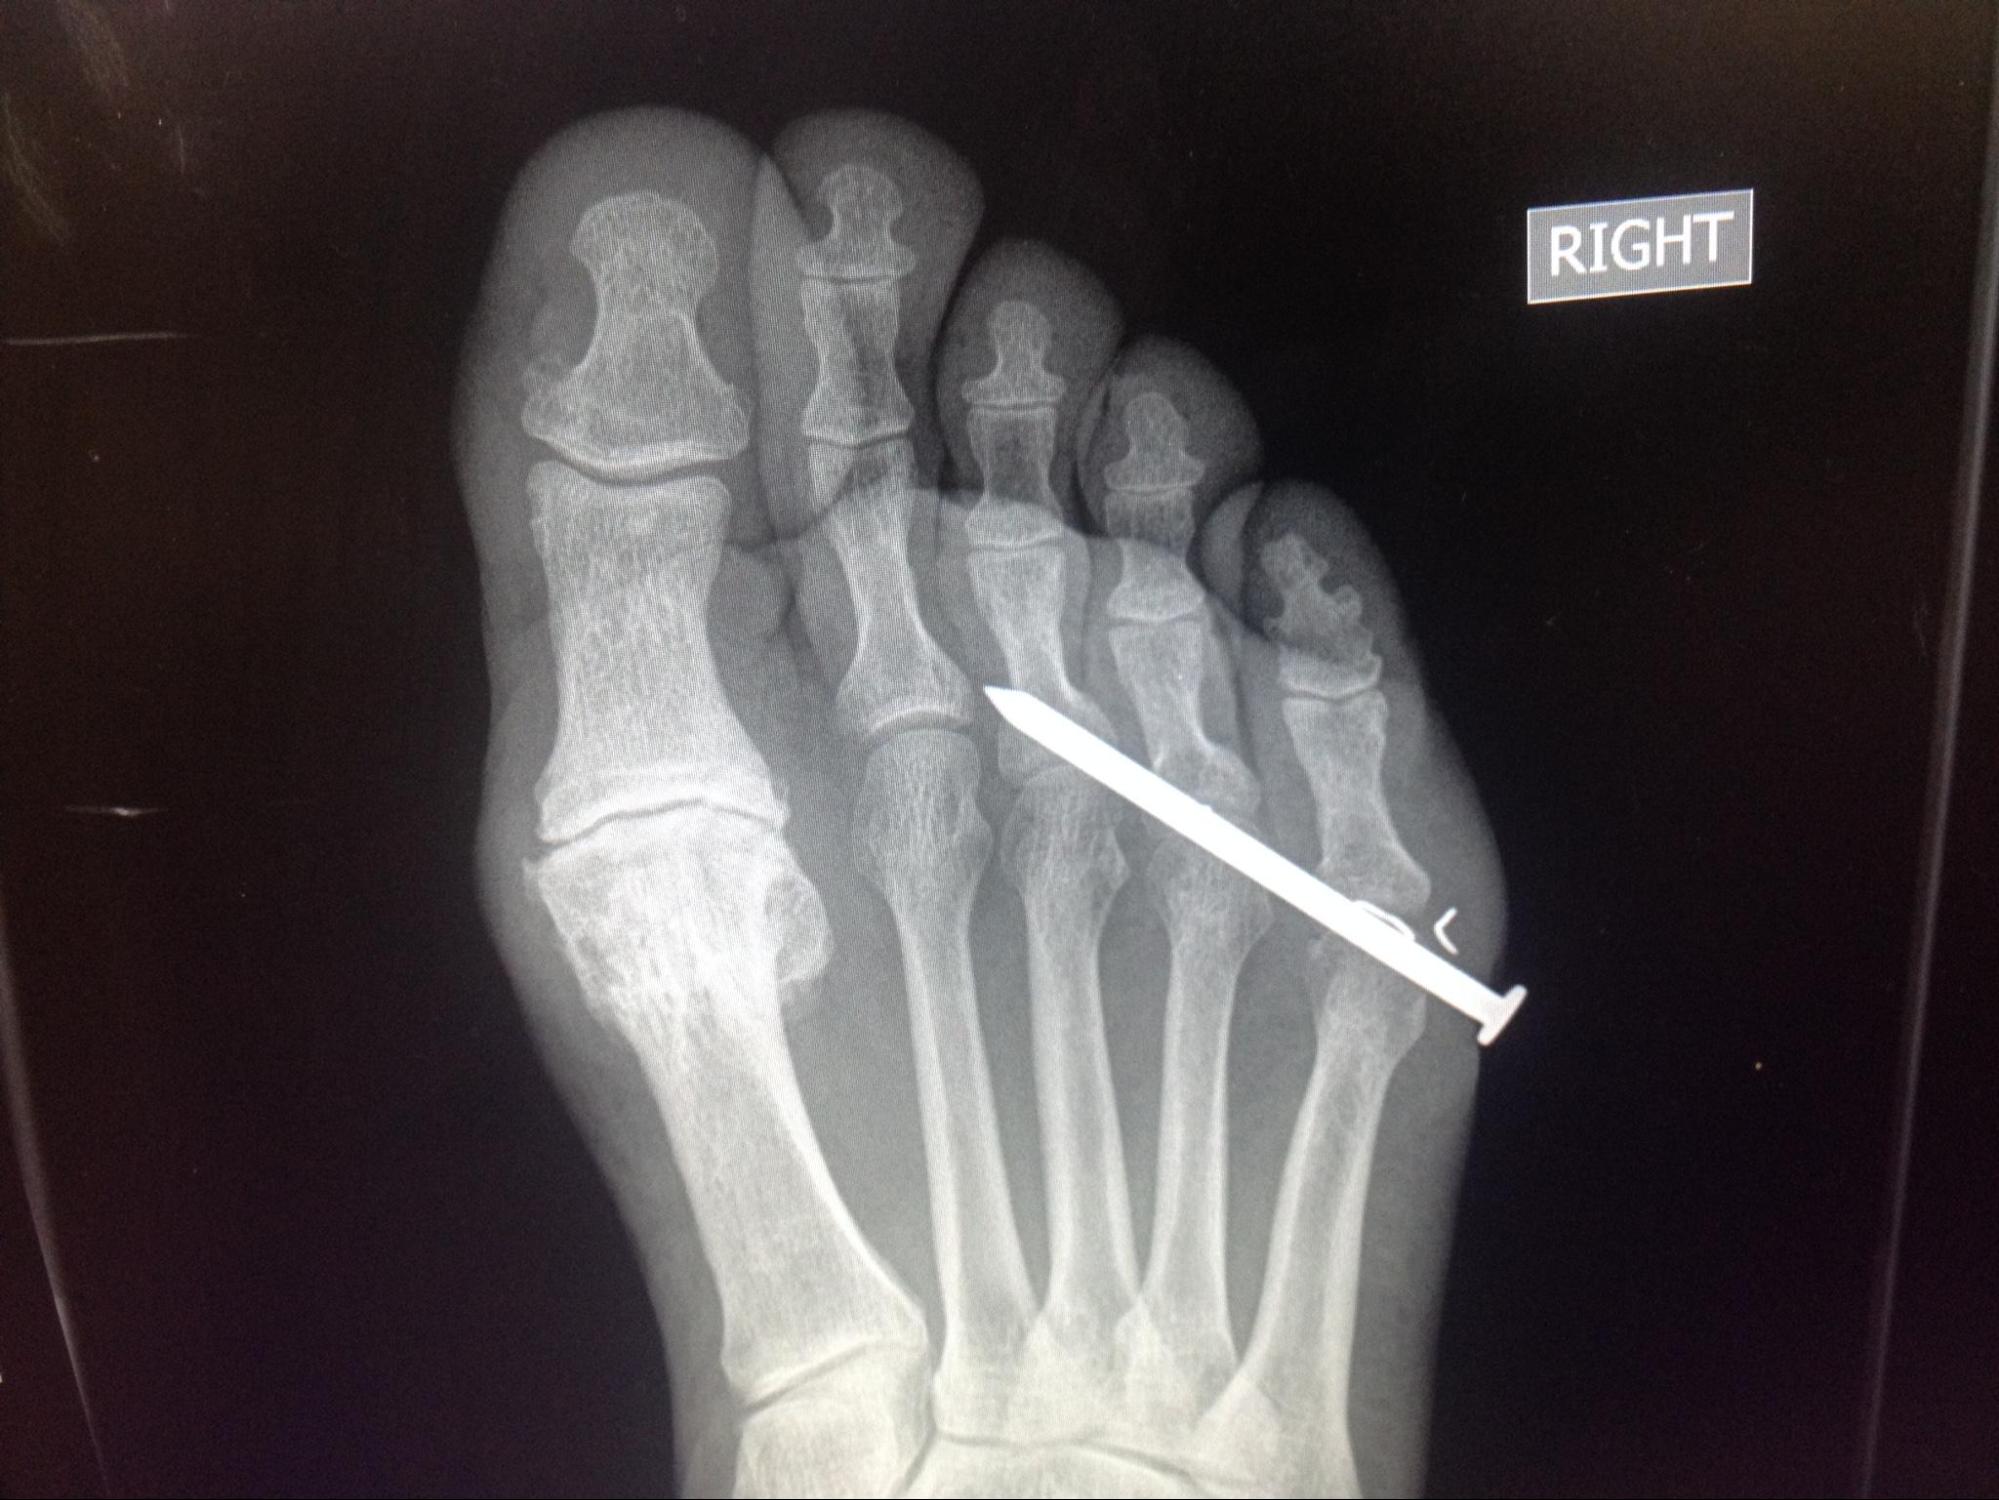 Foreign Body Imaging
Foot radiograph with metallic foreign body (nail). 